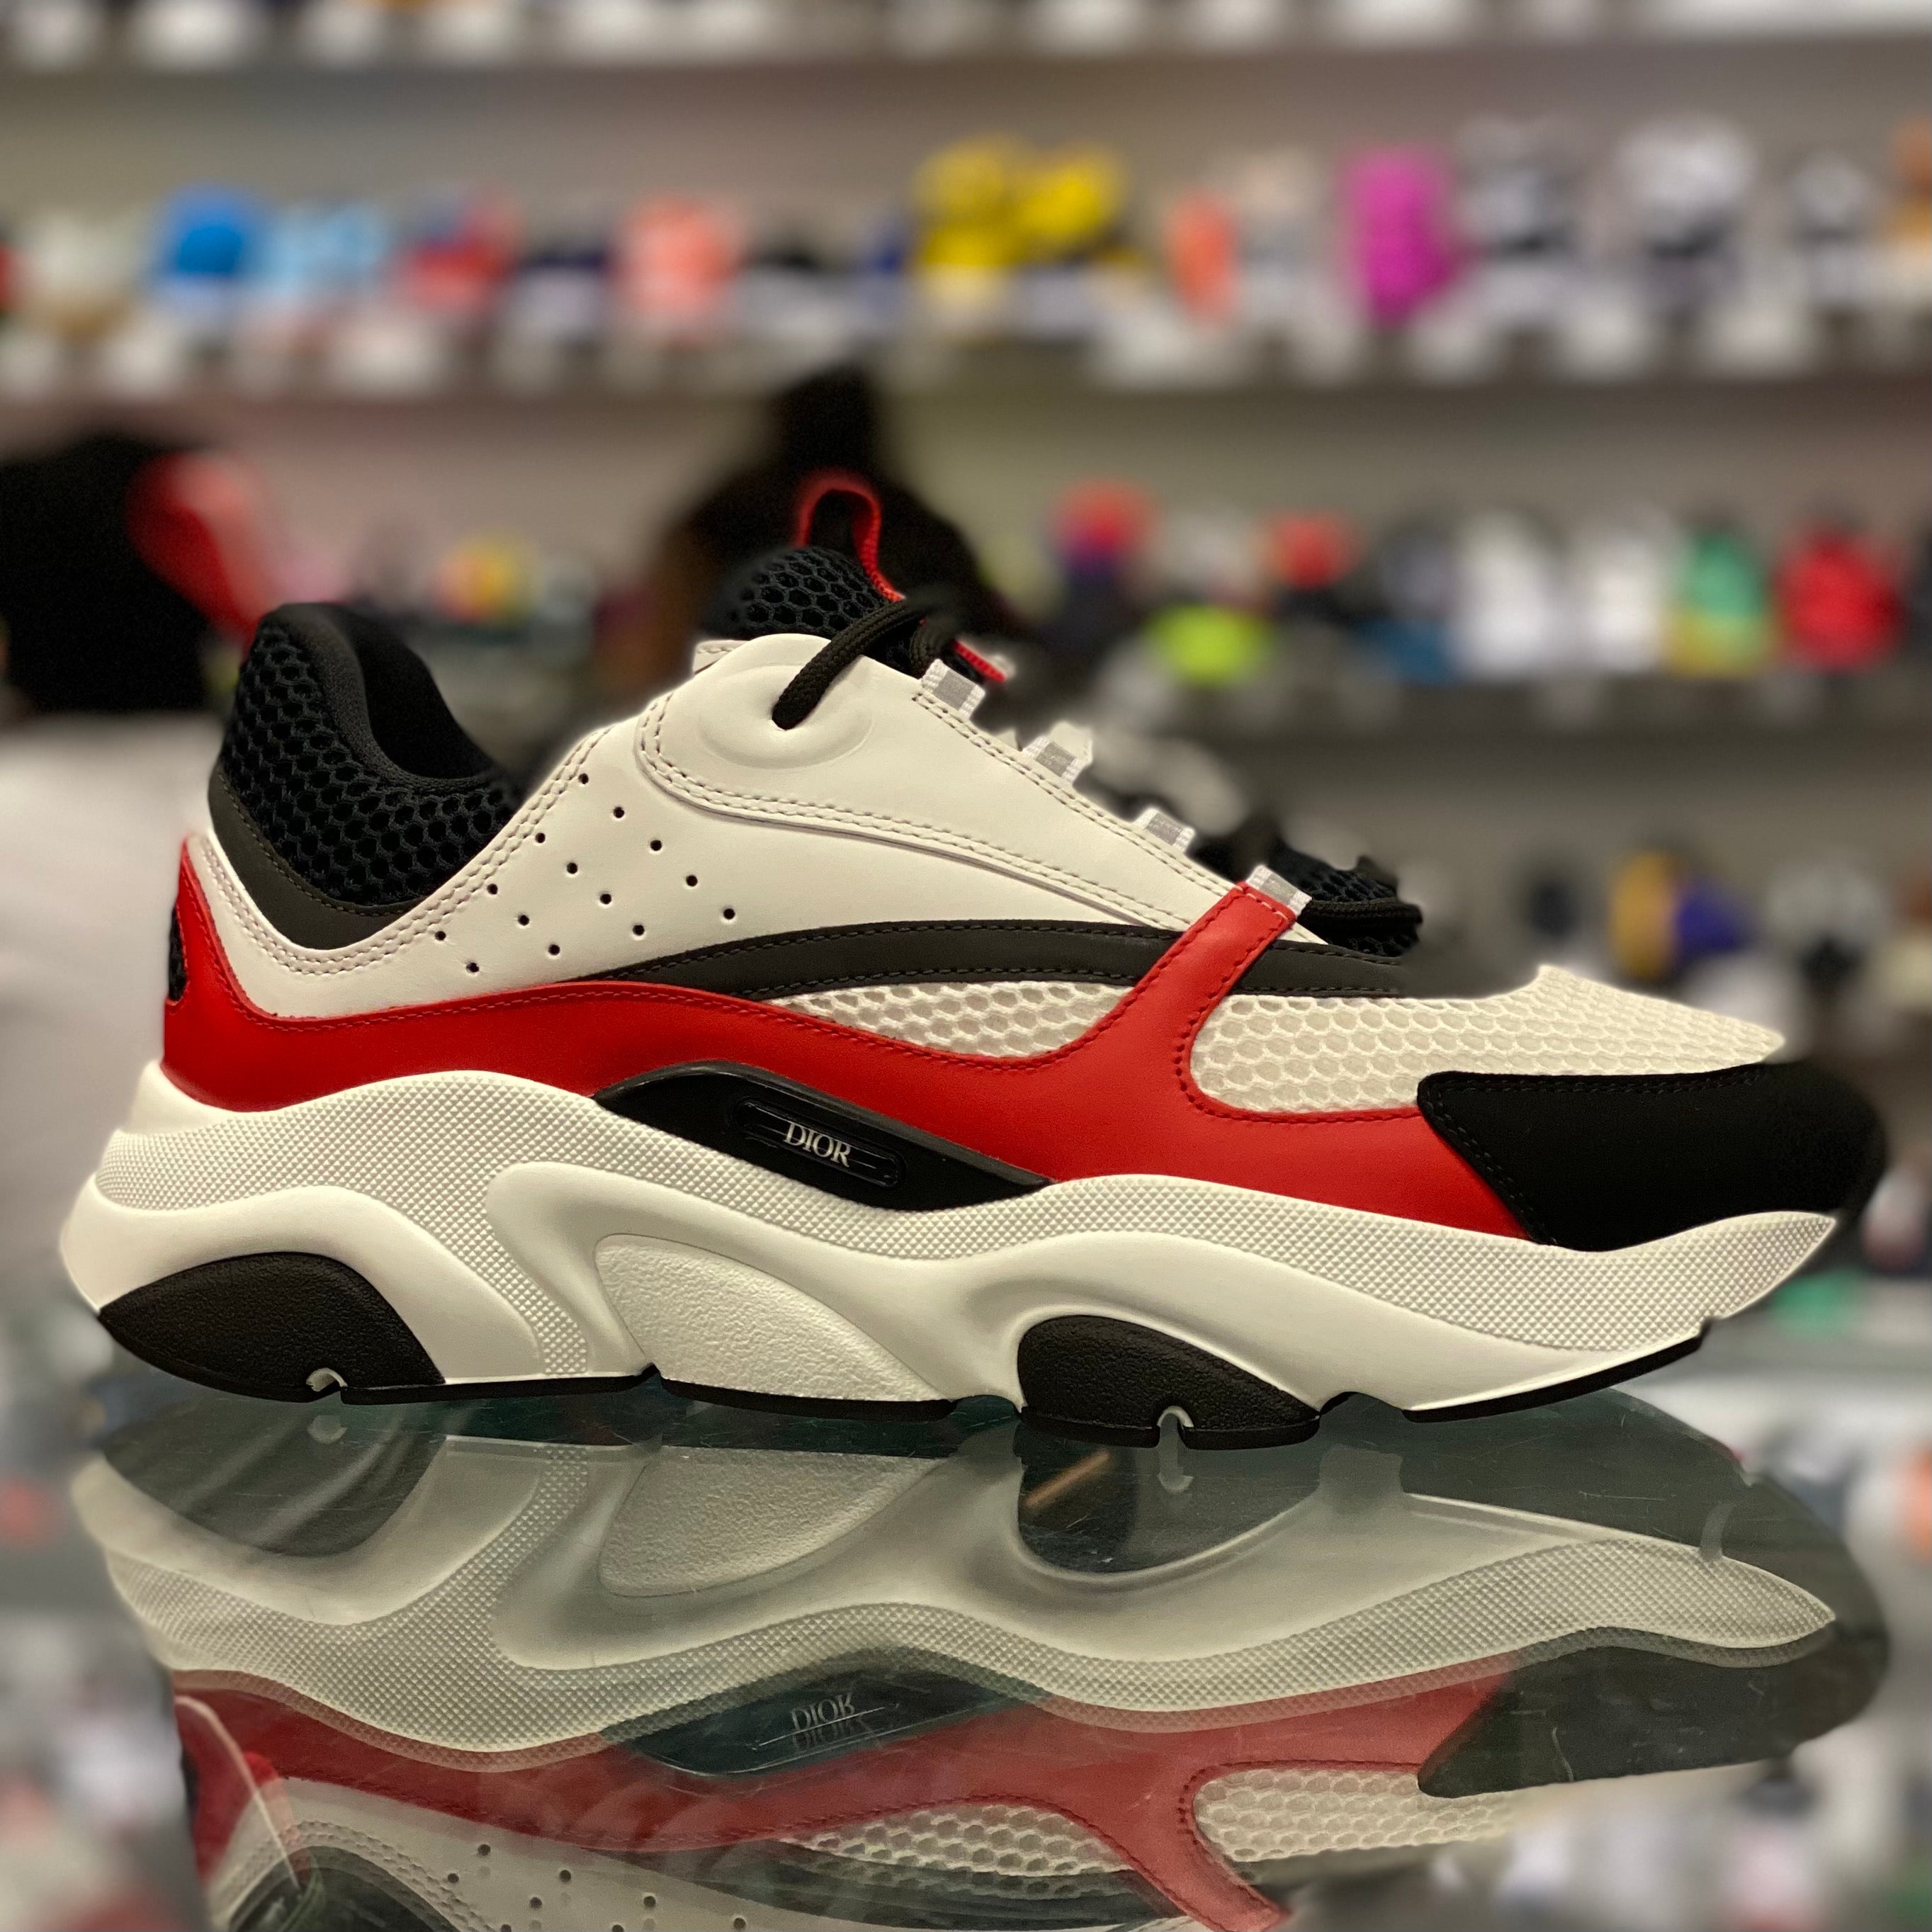 Dior White, Red, & Black 'B22' Sneakers